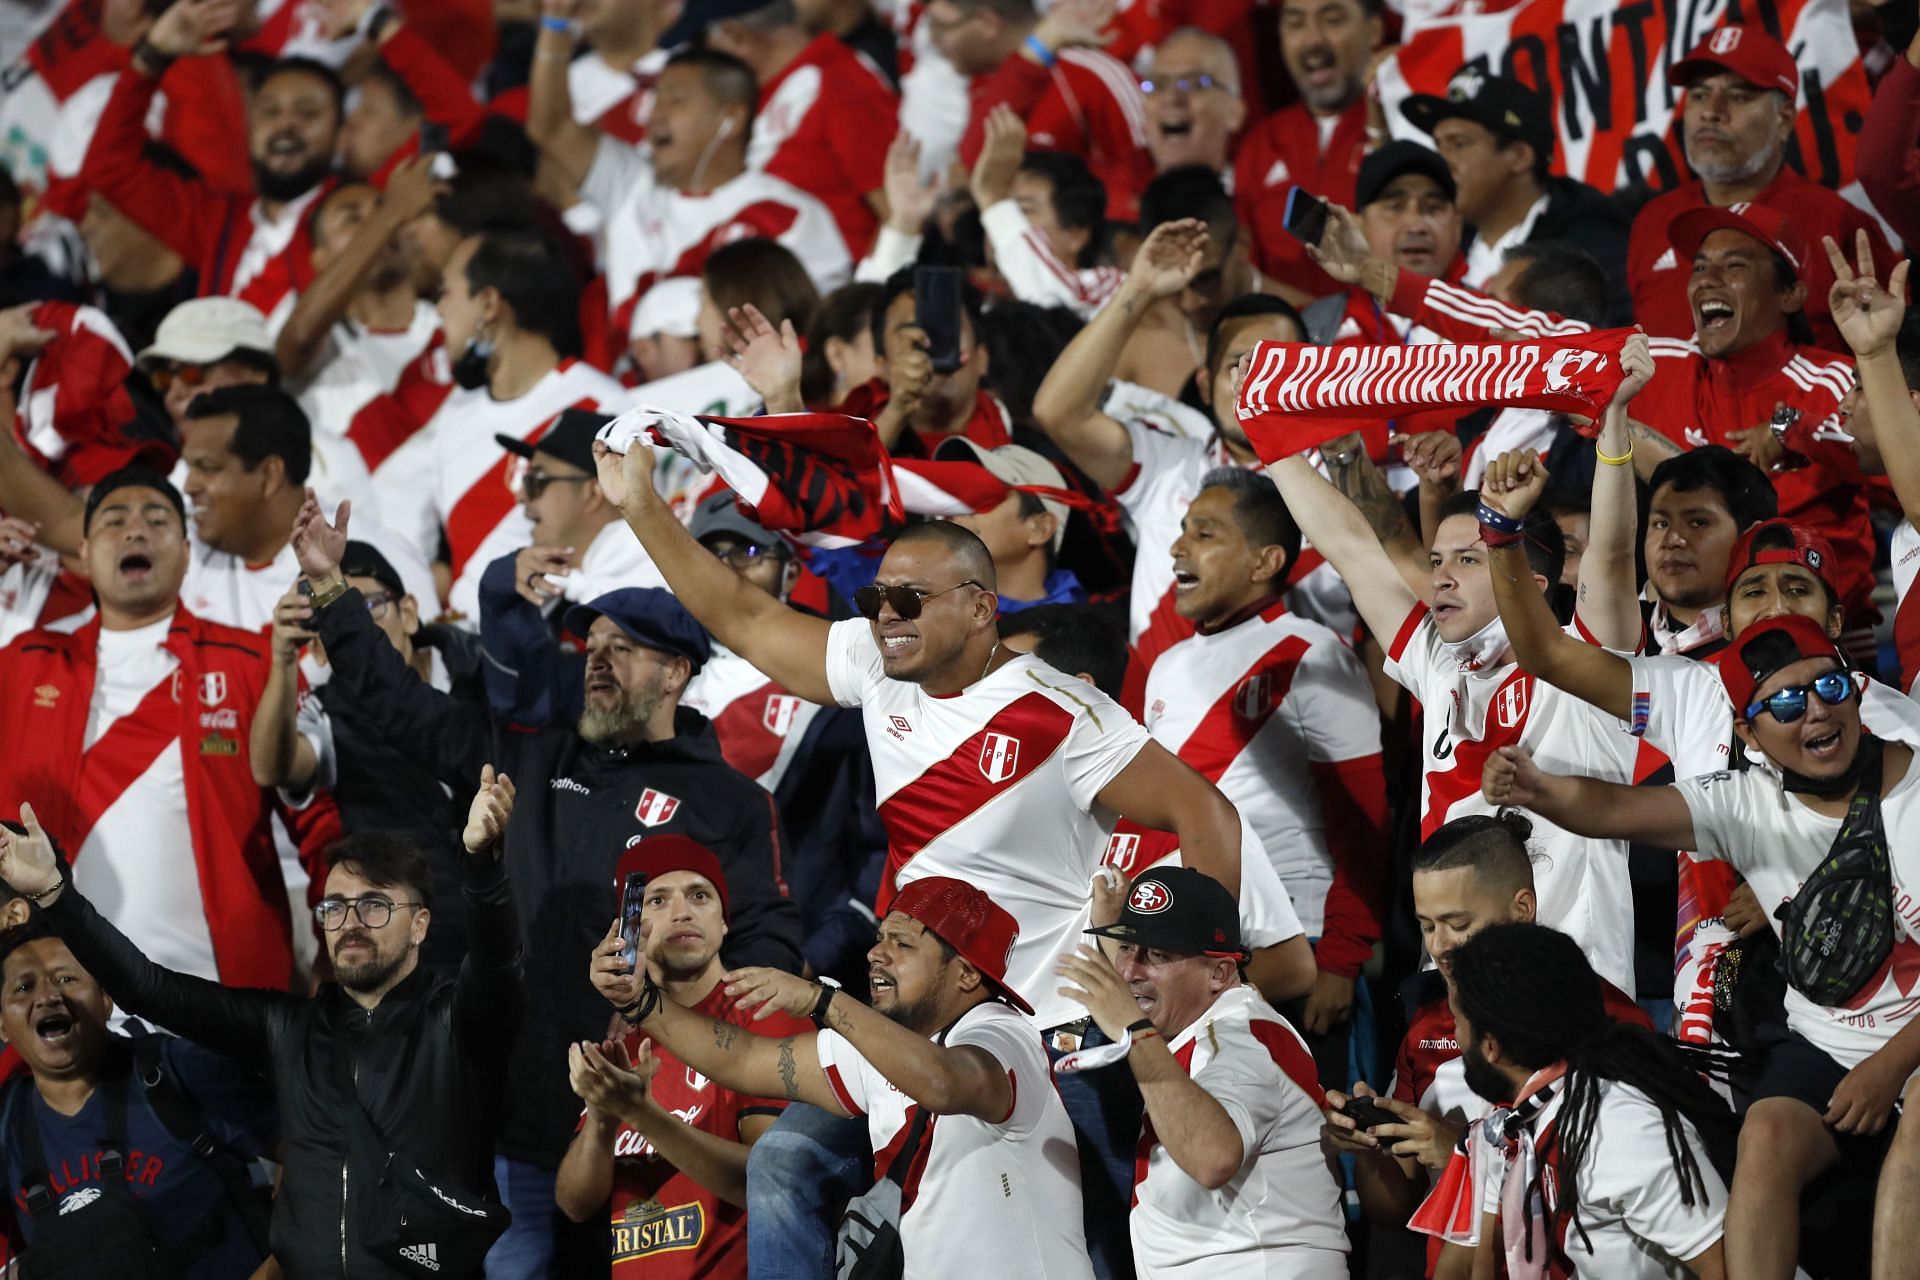 Peru play host to Paraguay on Wednesday.